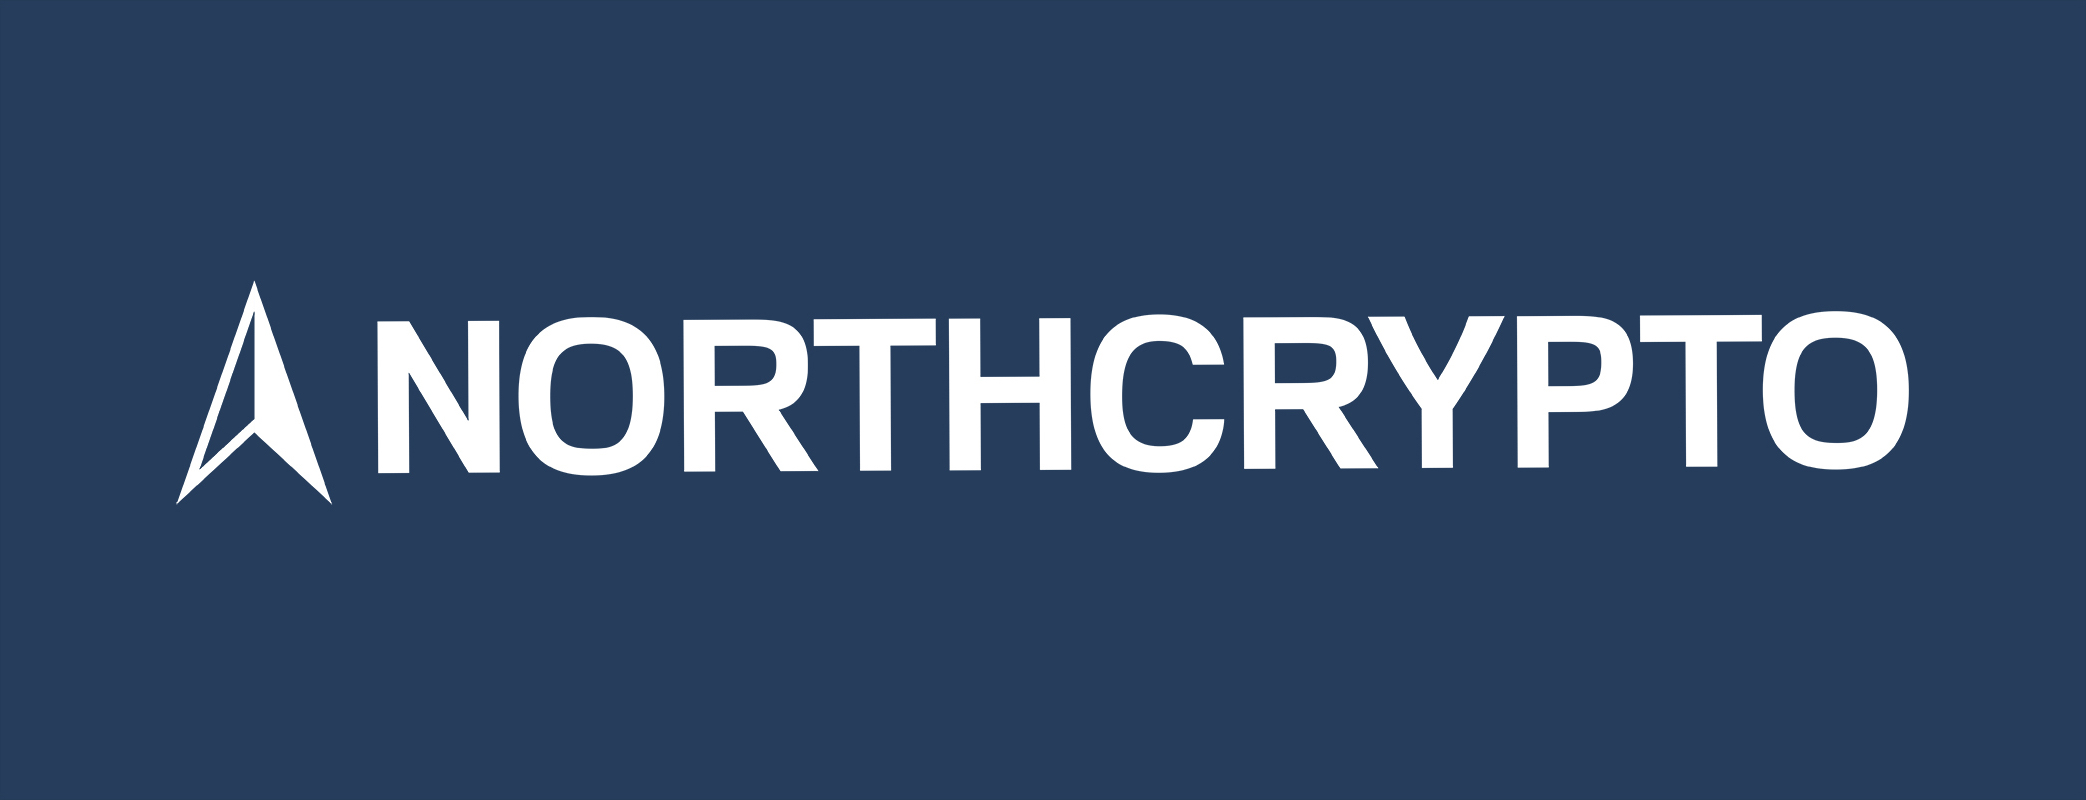 Referral program has been published - earn by recommending Northcrypto